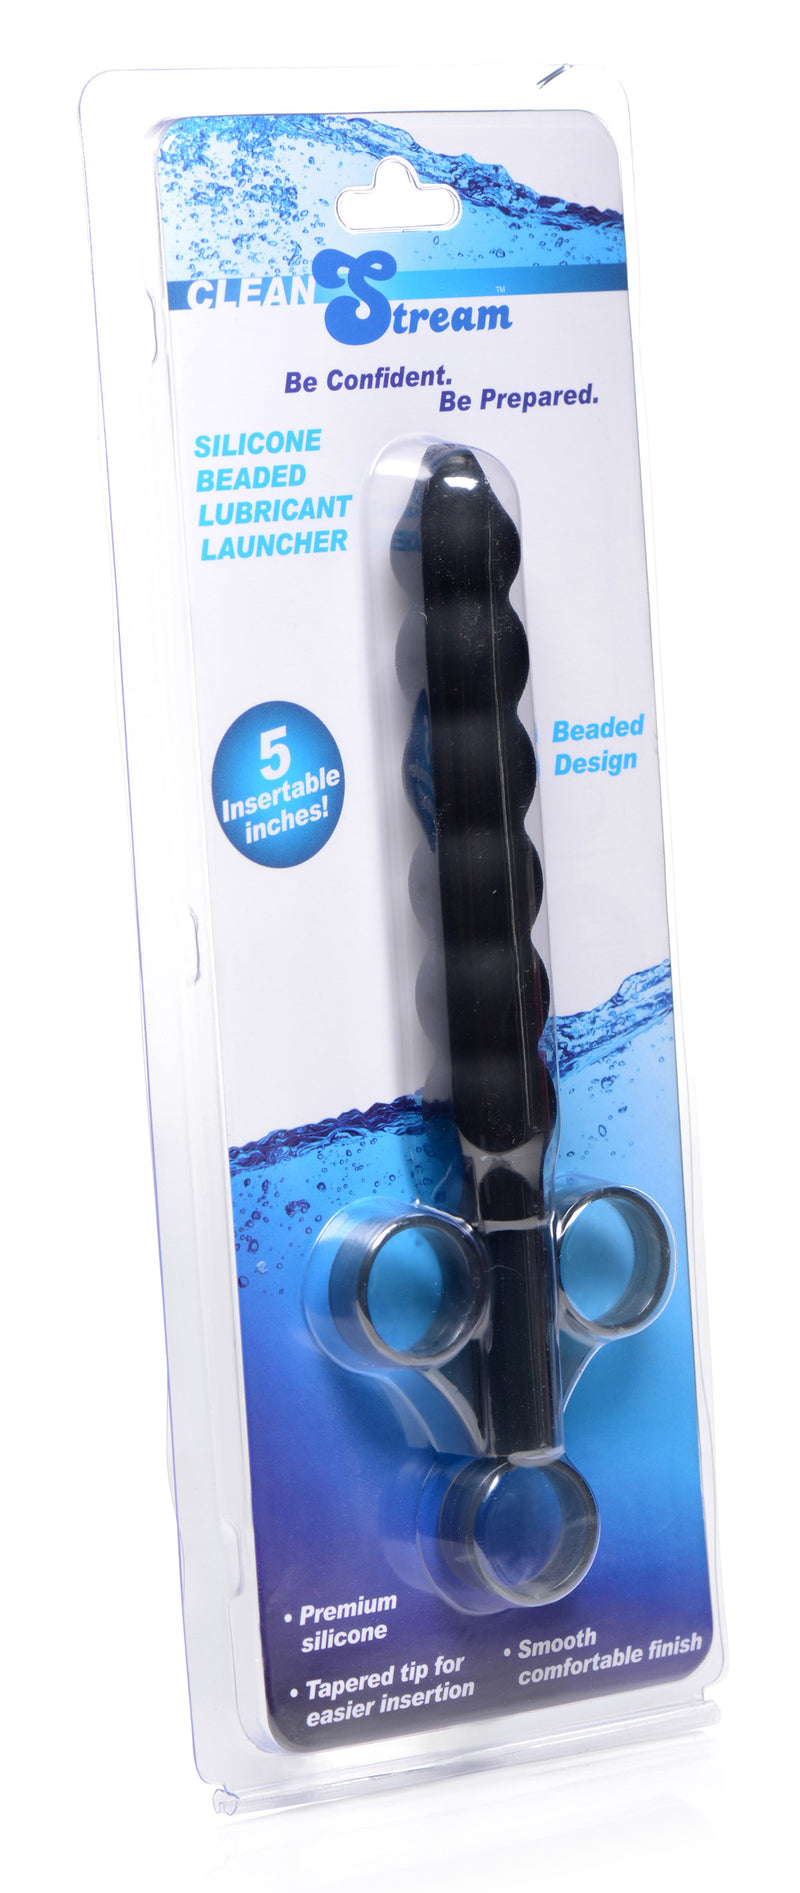 Silicone Beaded Lubricant Launcher lube-applicator from CleanStream